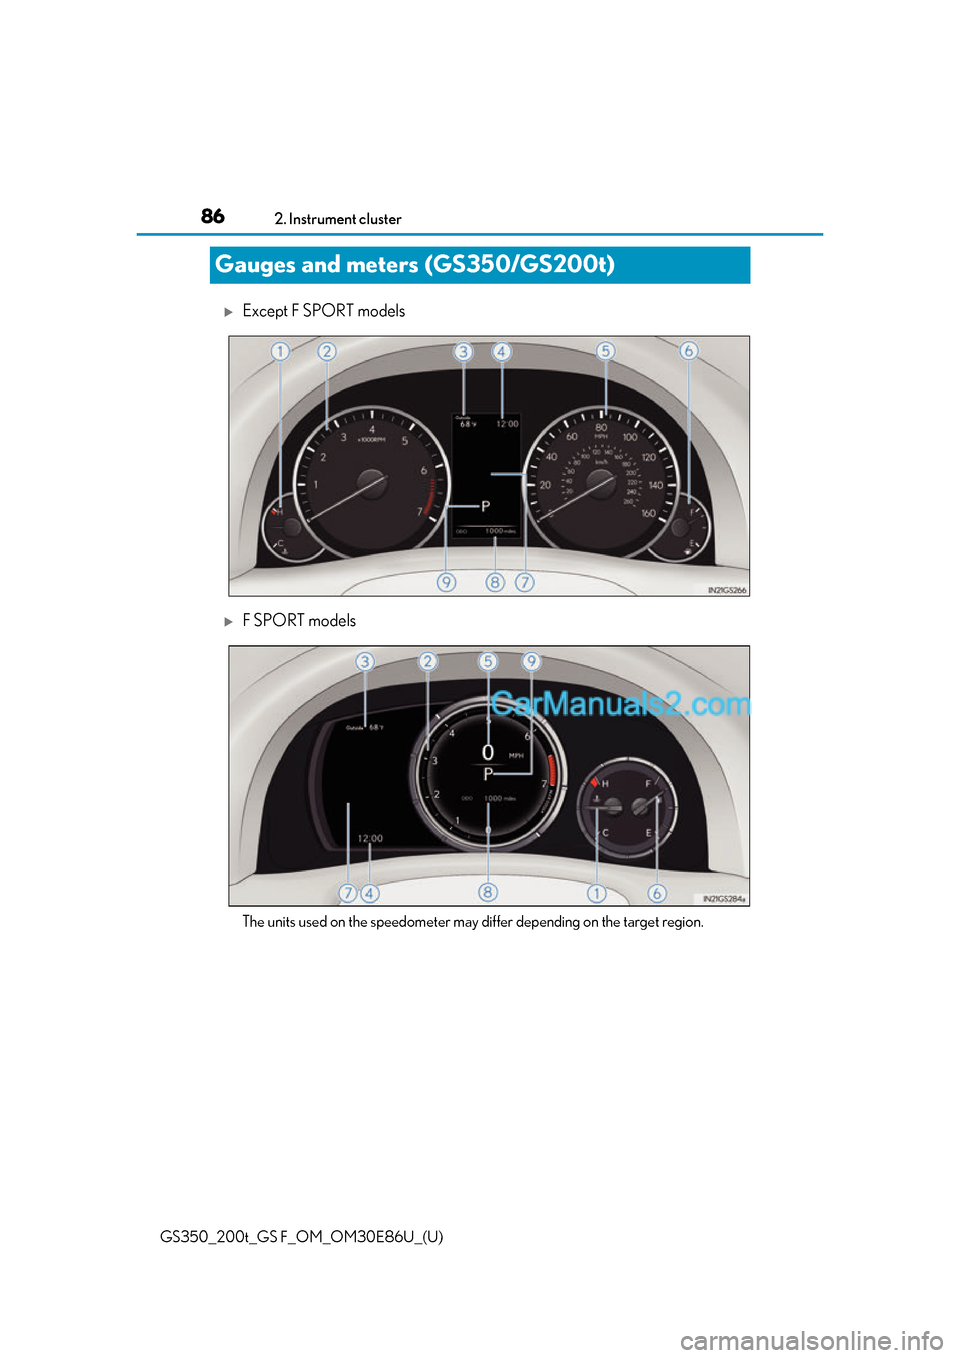 Lexus GS350 2016  Owners Manual 86
GS350_200t_GS F_OM_OM30E86U_(U)2. Instrument cluster
Gauges and meters (GS350/GS200t)
Except F SPORT models
F SPORT models
The units used on the speedometer may differ depending on the target